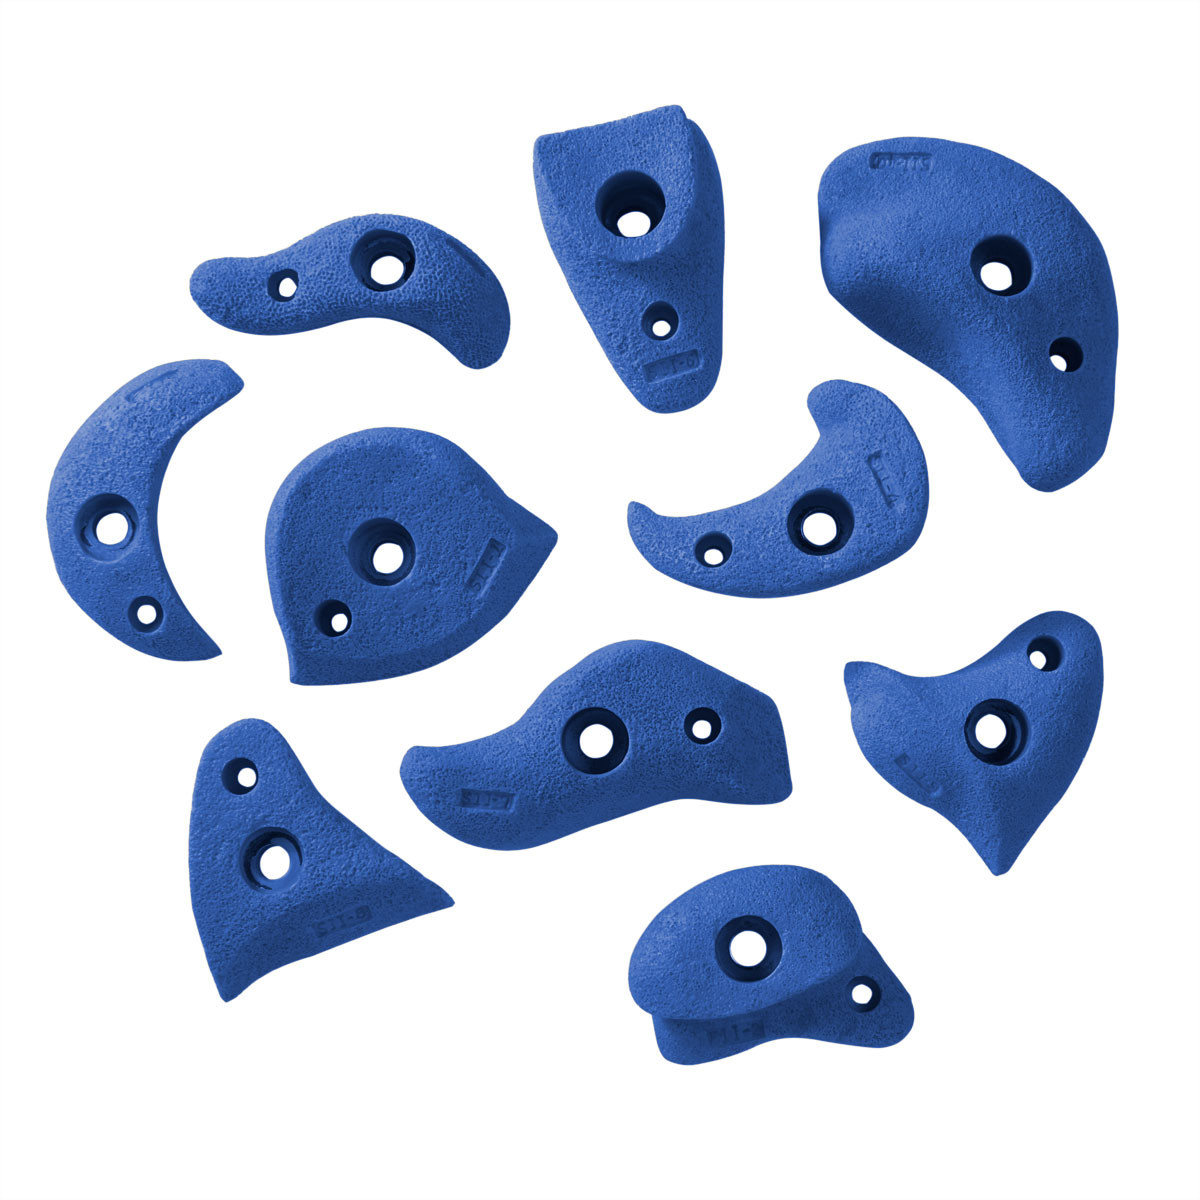 Composite Sand Hand Holds - Blue